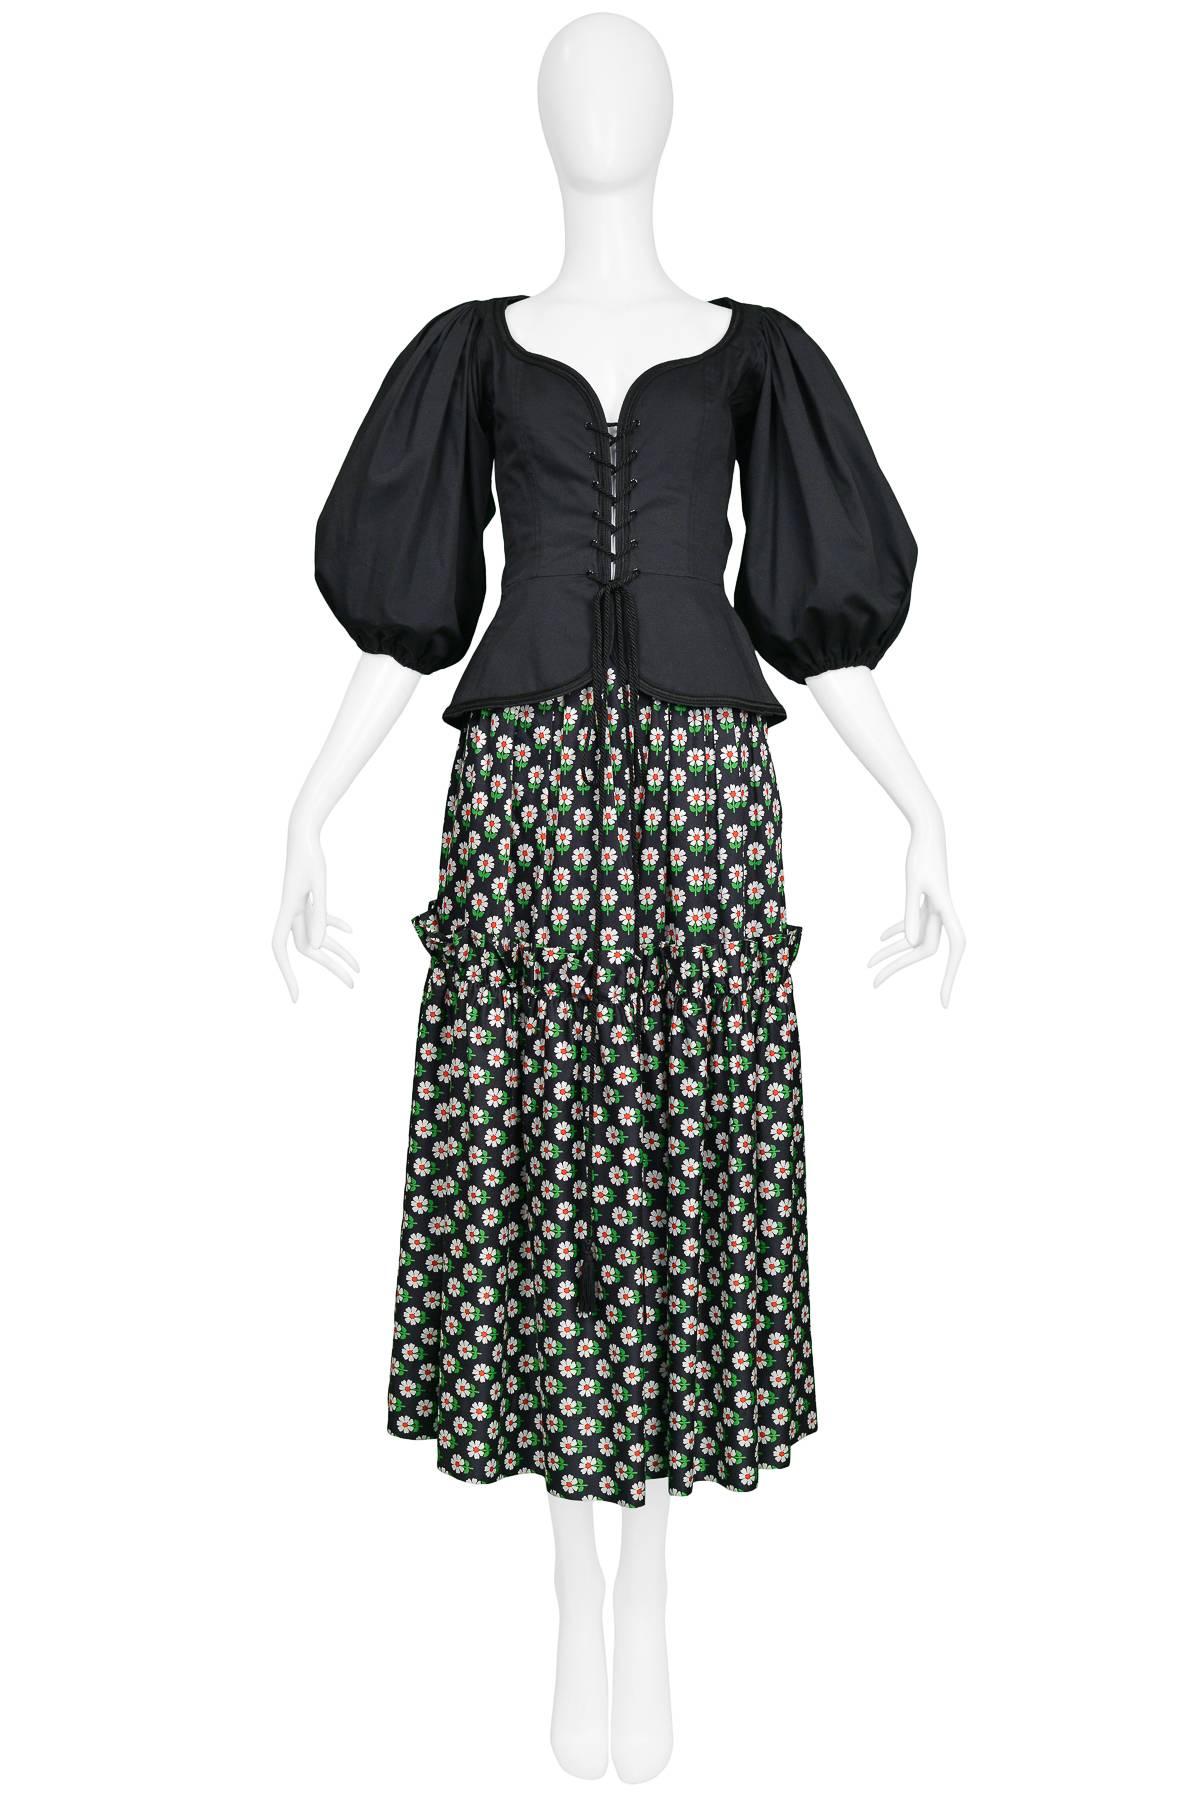 Yves Saint Laurent Peasant Ensemble featuring a black cotton tassel corset blouse from the Spring/Summer 1977 Russian Collection & daisy-print ink blue cotton peasant skirt.

Excellent Condition.

Size: 36 Skirt, 36 Top
